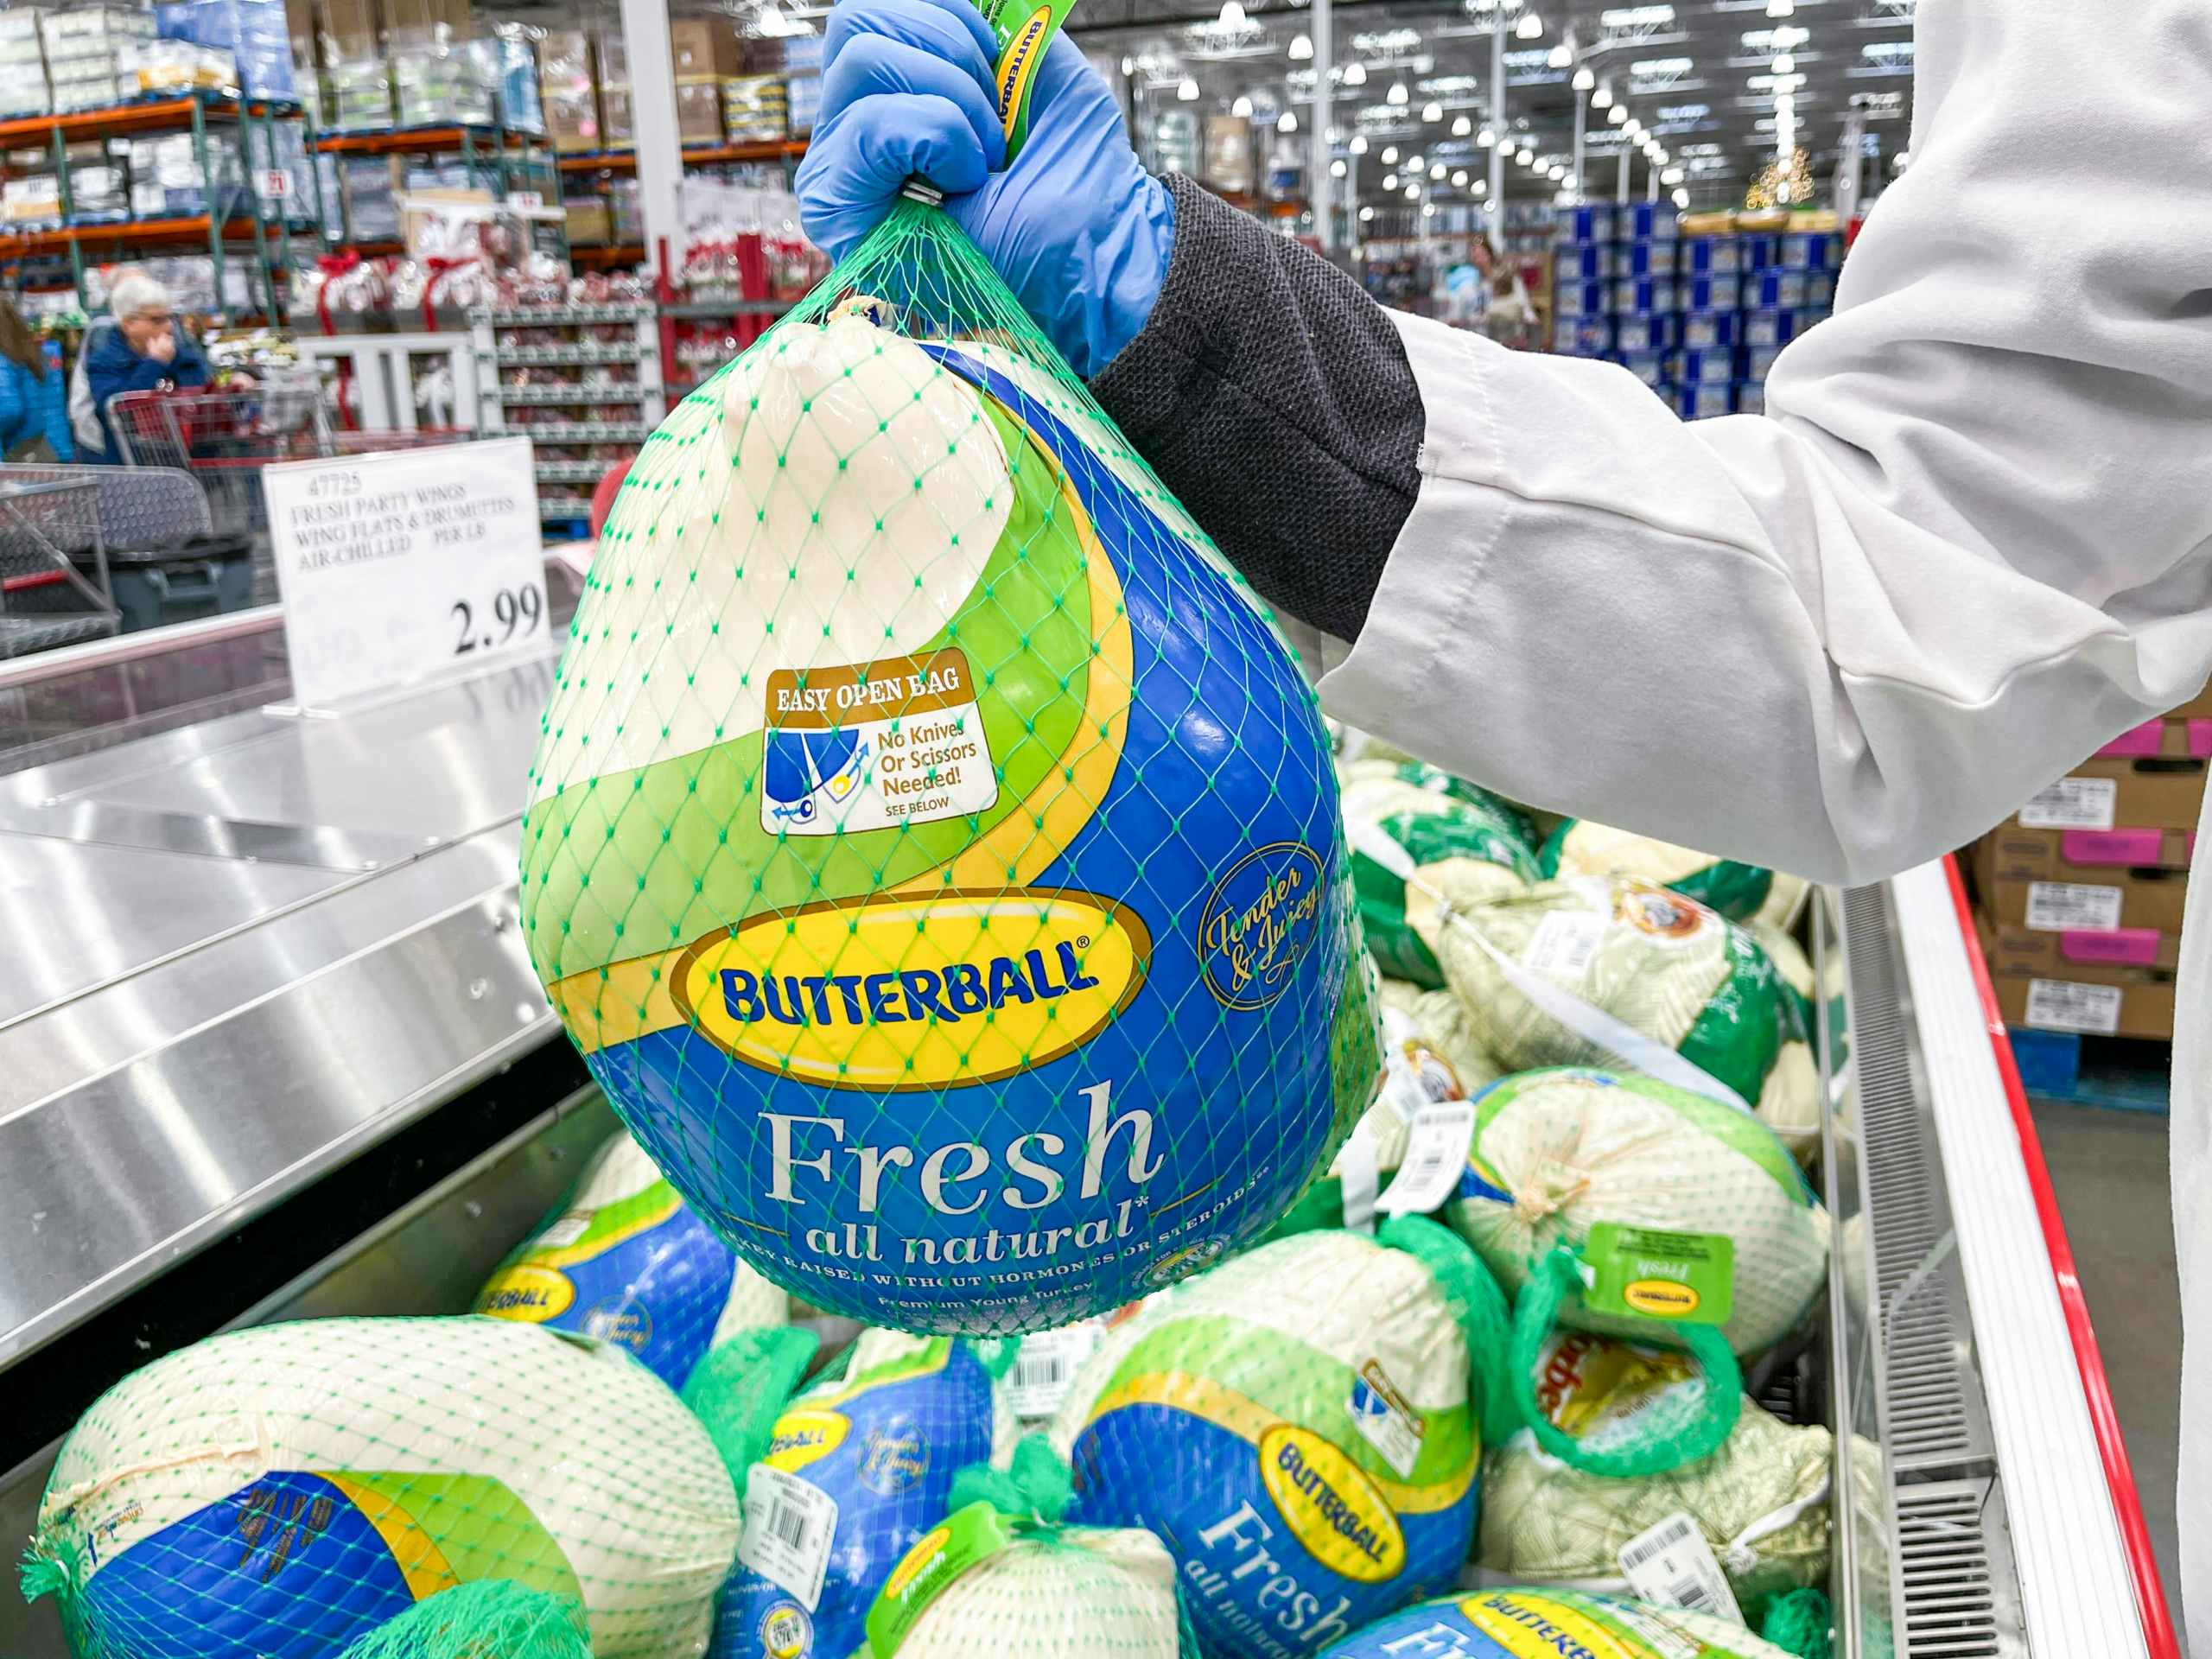 costco-fresh-whole-turkeys-butterball-fresh-99-cents-pound-thanksgiving-meal-2022-7